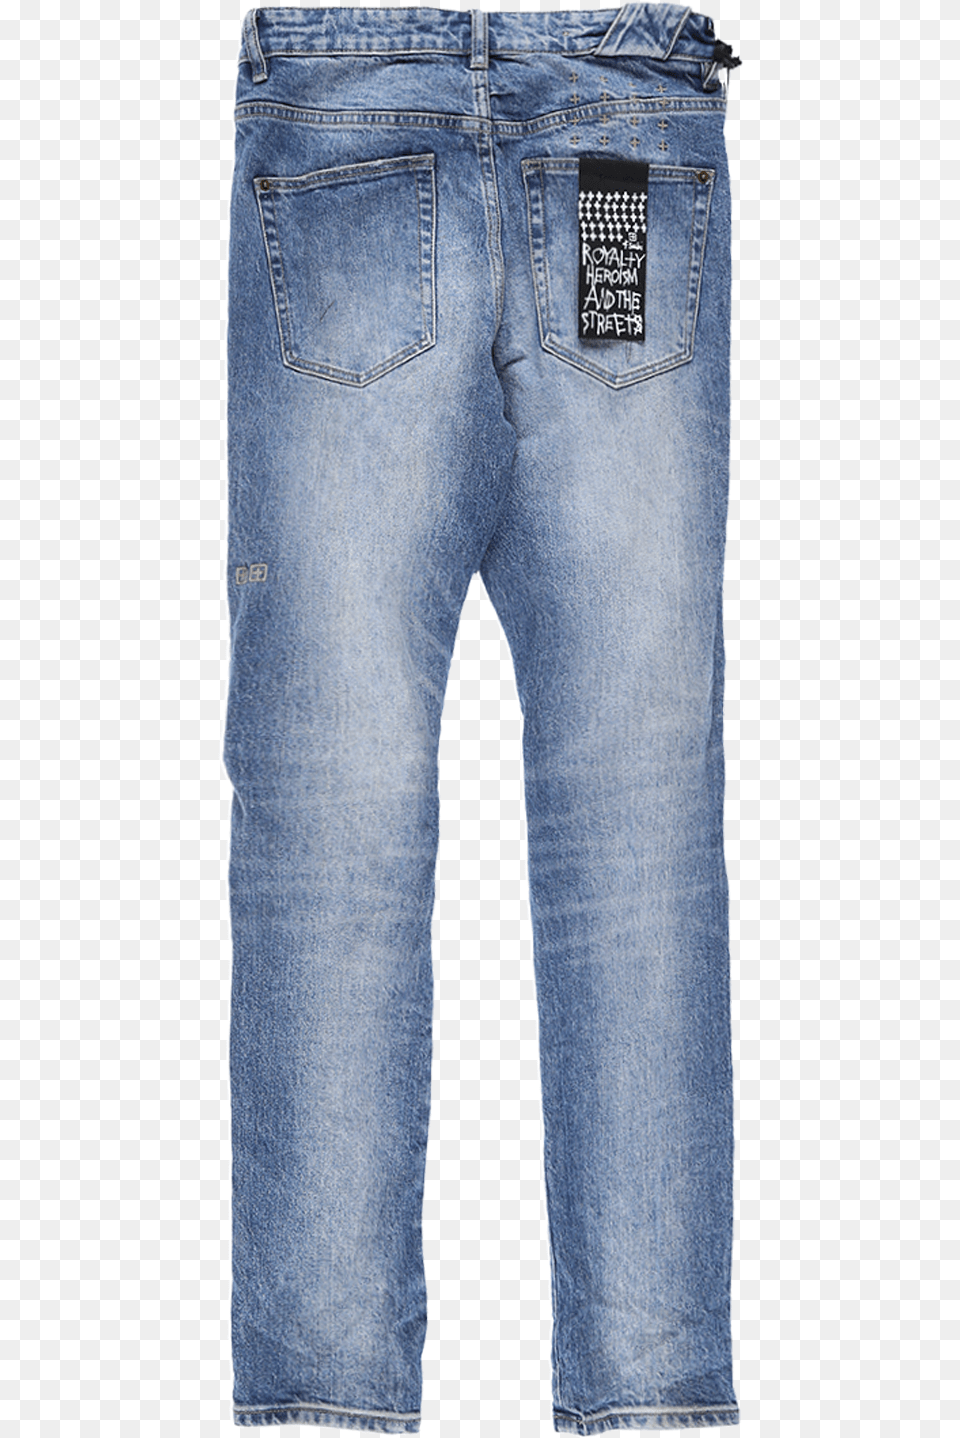 Pocket, Clothing, Jeans, Pants Free Png Download